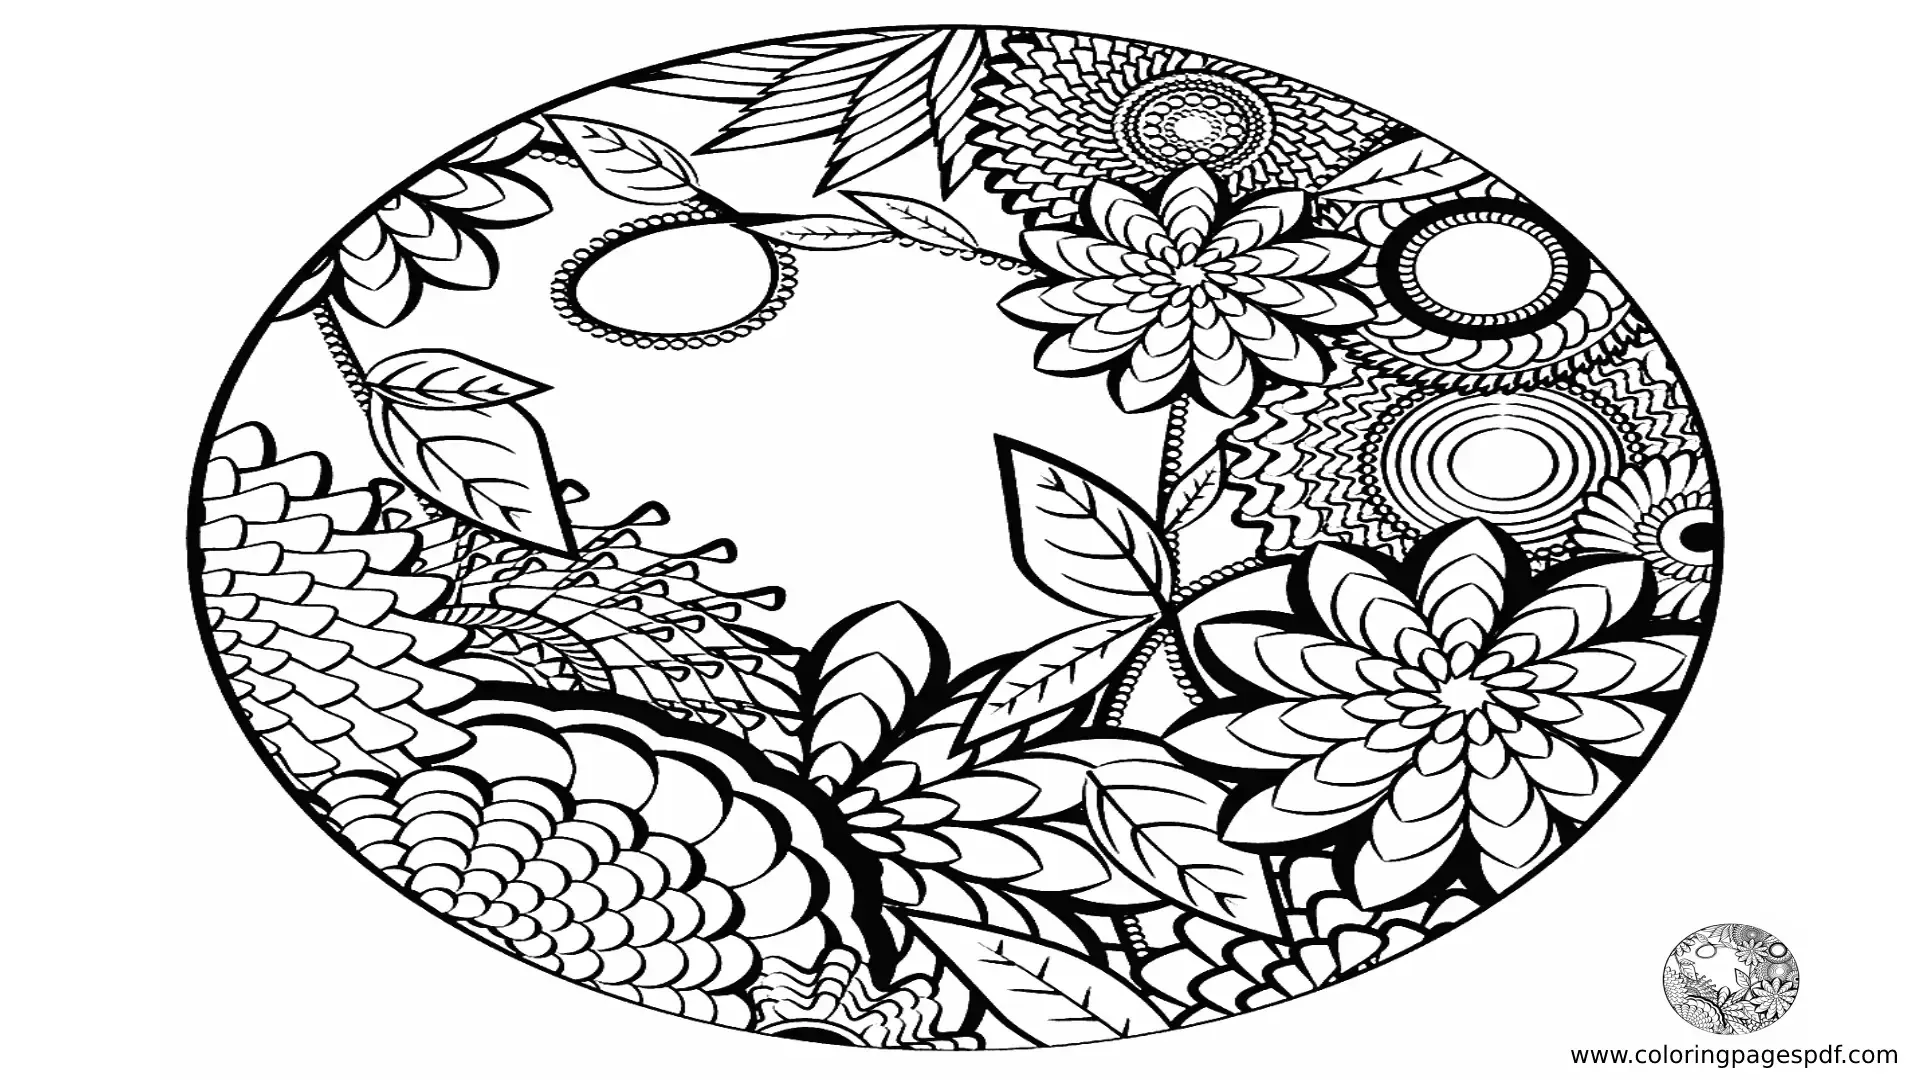 Coloring Pages Of A Circle With Flowers And Plants Mandala